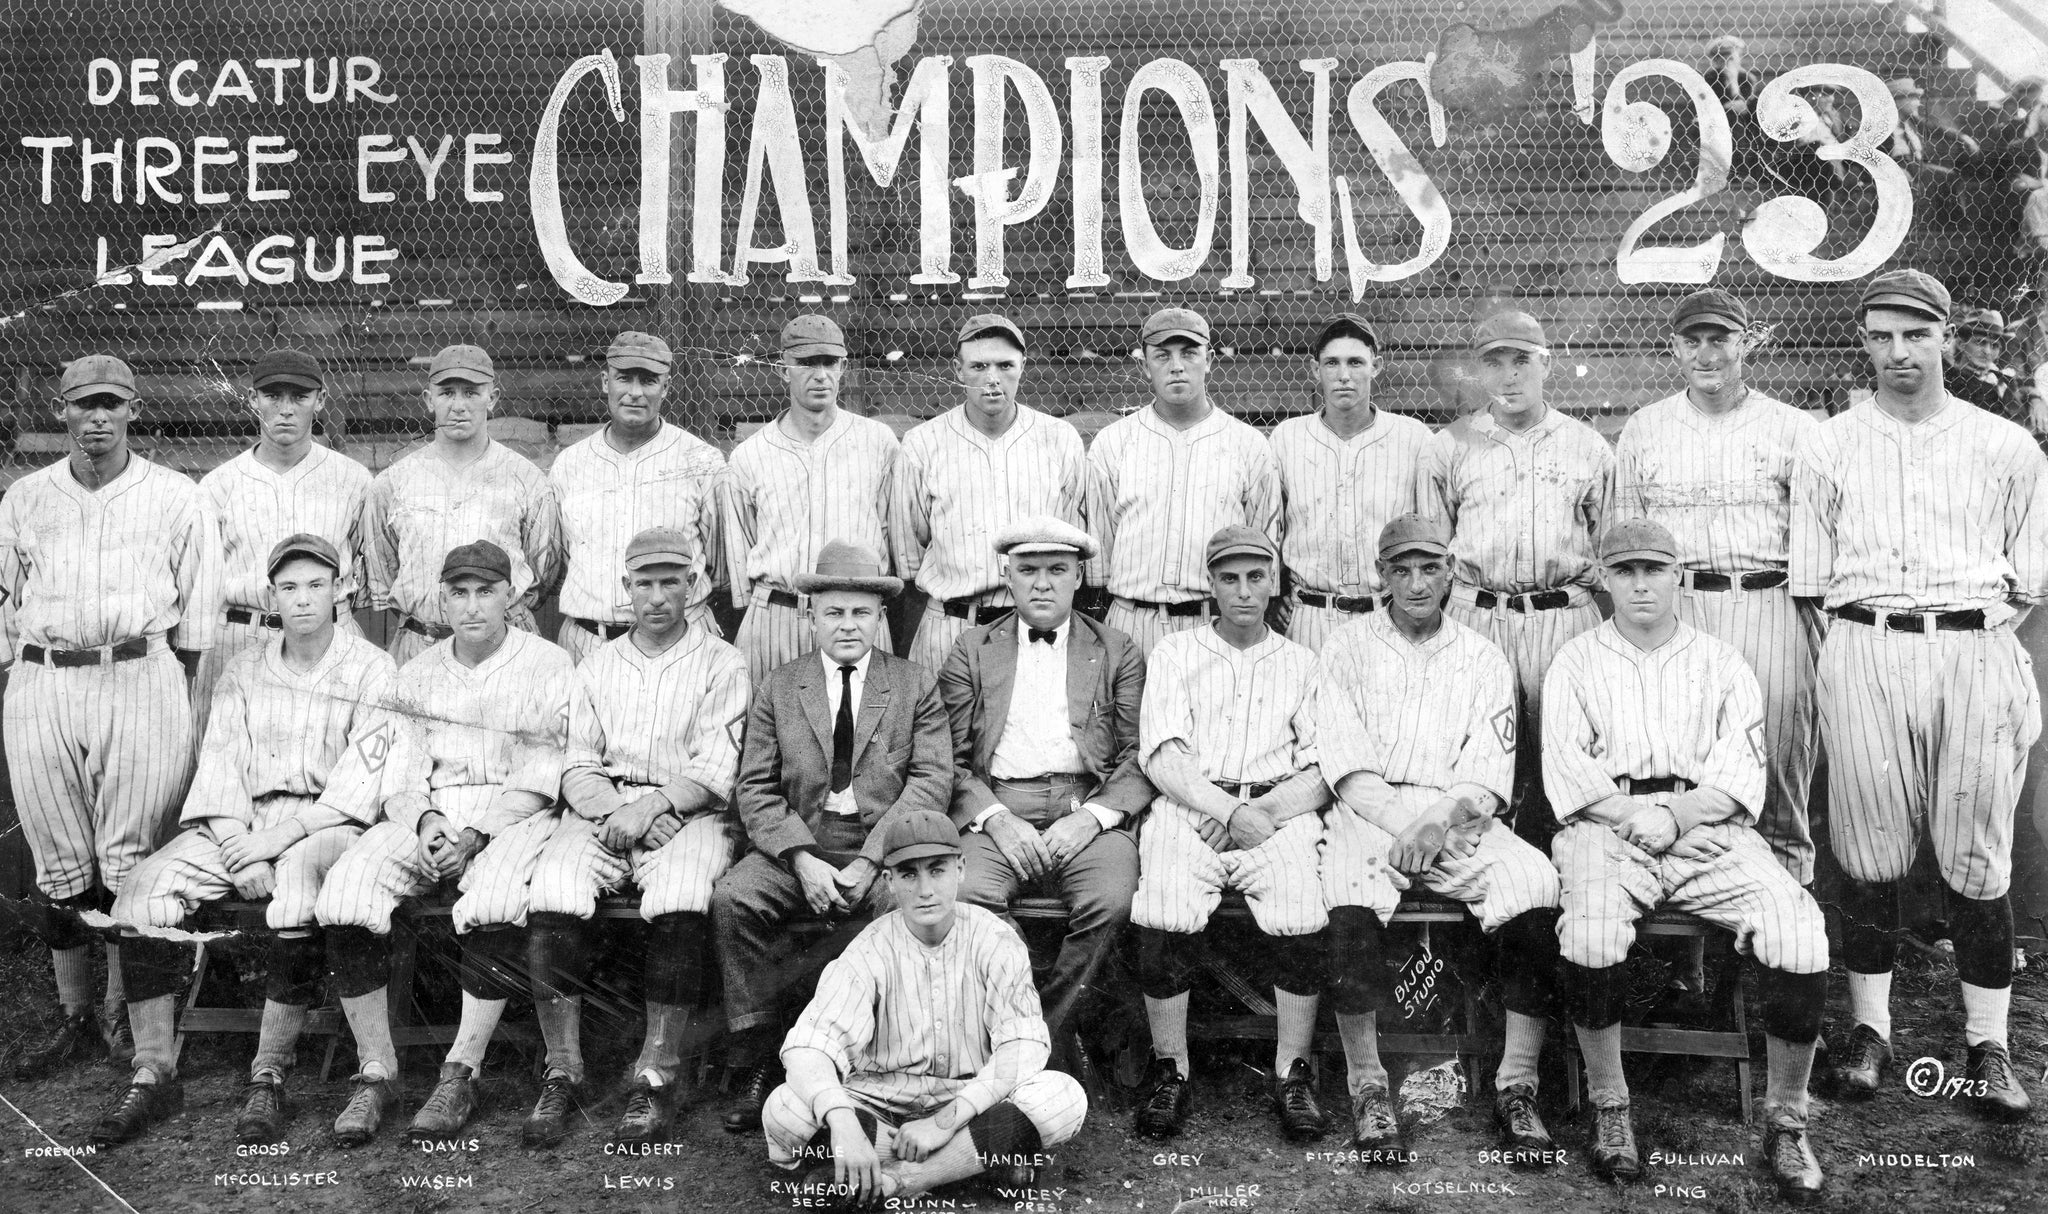 Decatur Commodores, Three-I League Champions of 1923. Front row, from left: Ralph McCollister, Fred Wasem, Lewis, R.W. Heady, Quinn (on ground), Wiley, Chuck Miller, Jack Kotselnick, Don Ping. Back row: Happy Foreman, Dan Gross, Glenn Davis, Ernest Calbert, Glen Harle, Handley, Gray, Fitzgerald, Brenner, Sullivan, John Middleton. -- Decatur Genealogical Society